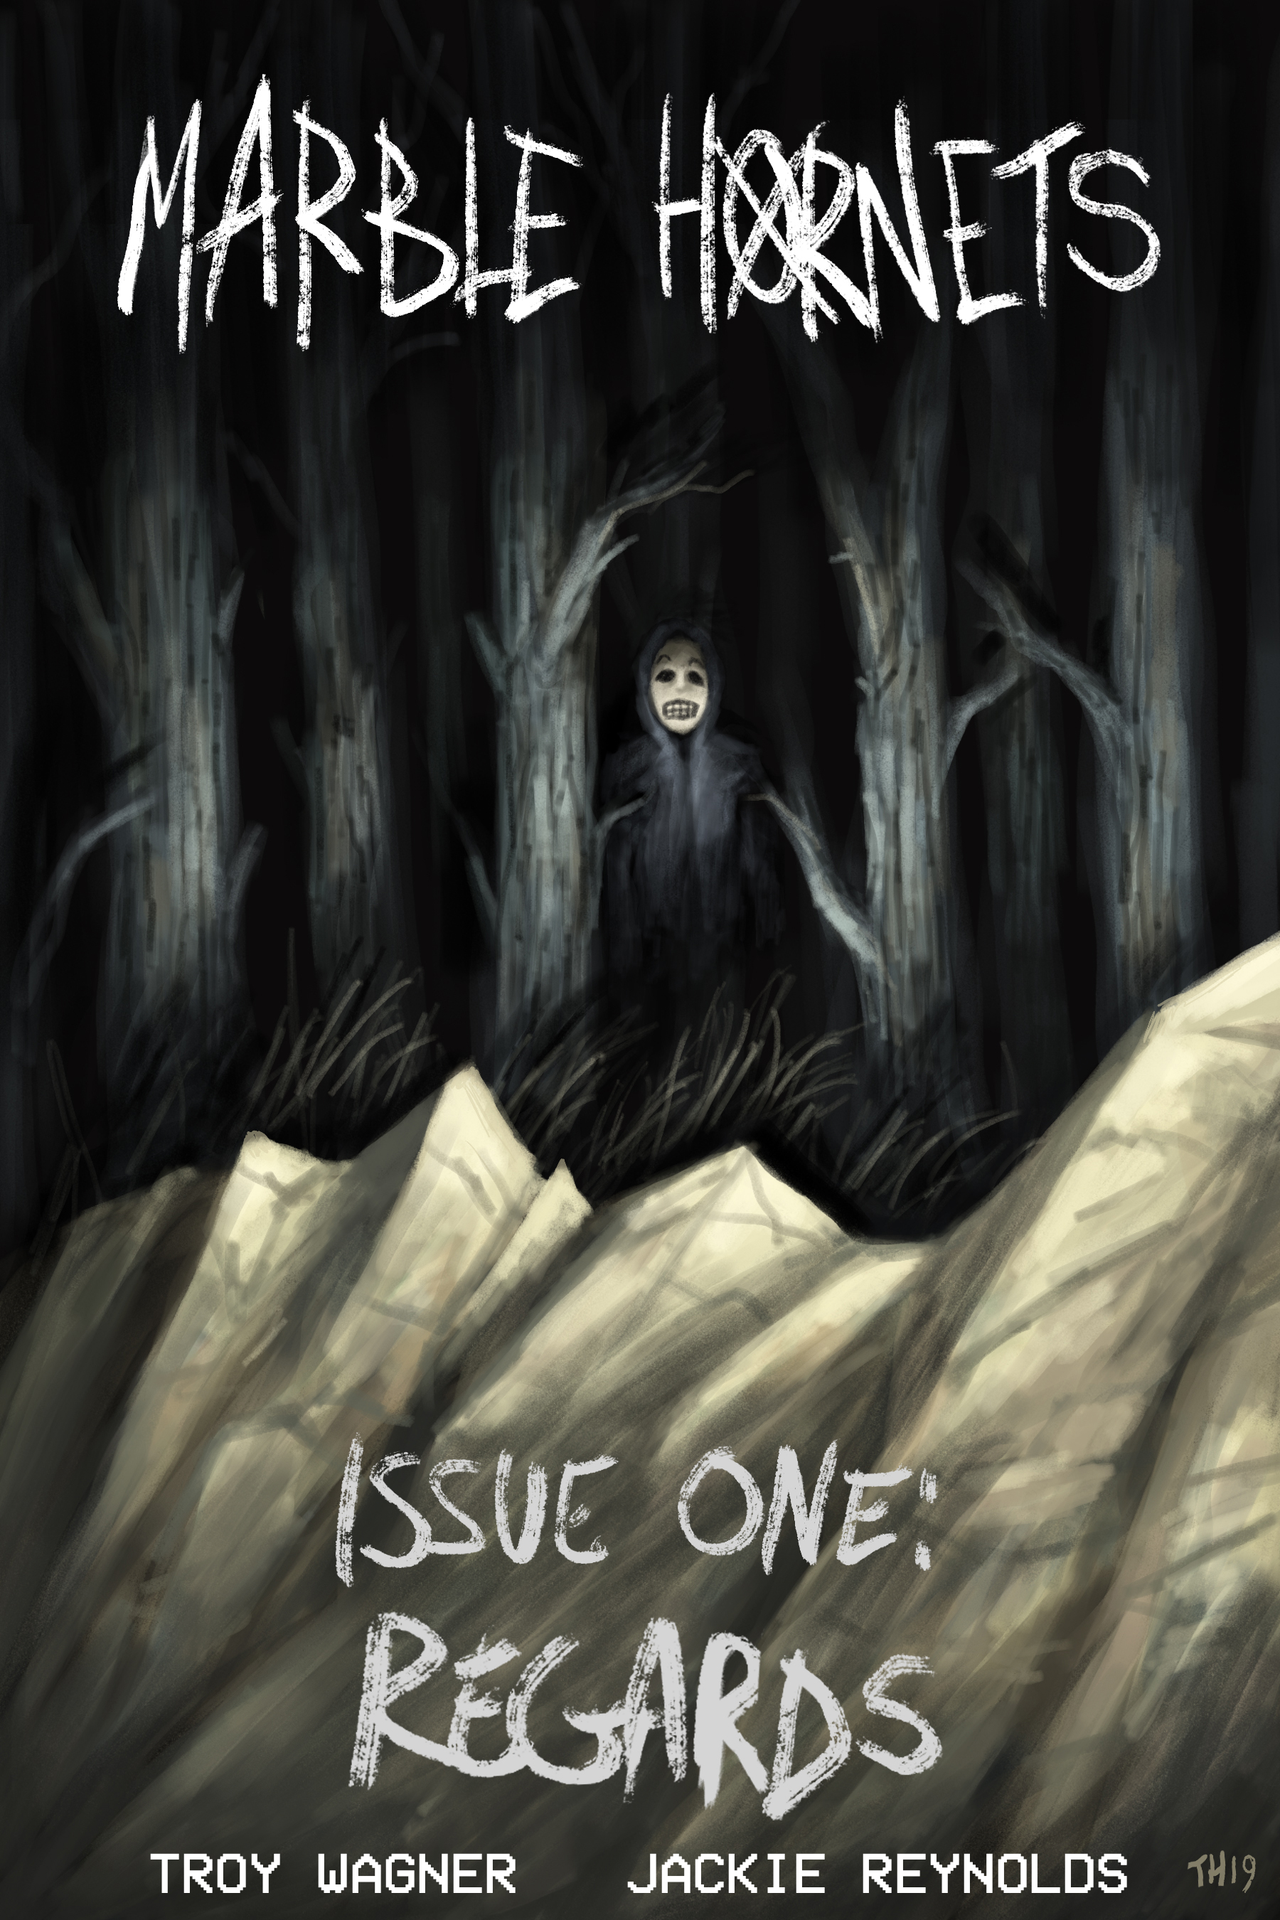 Marble Hornets Issue One: Regards - Download